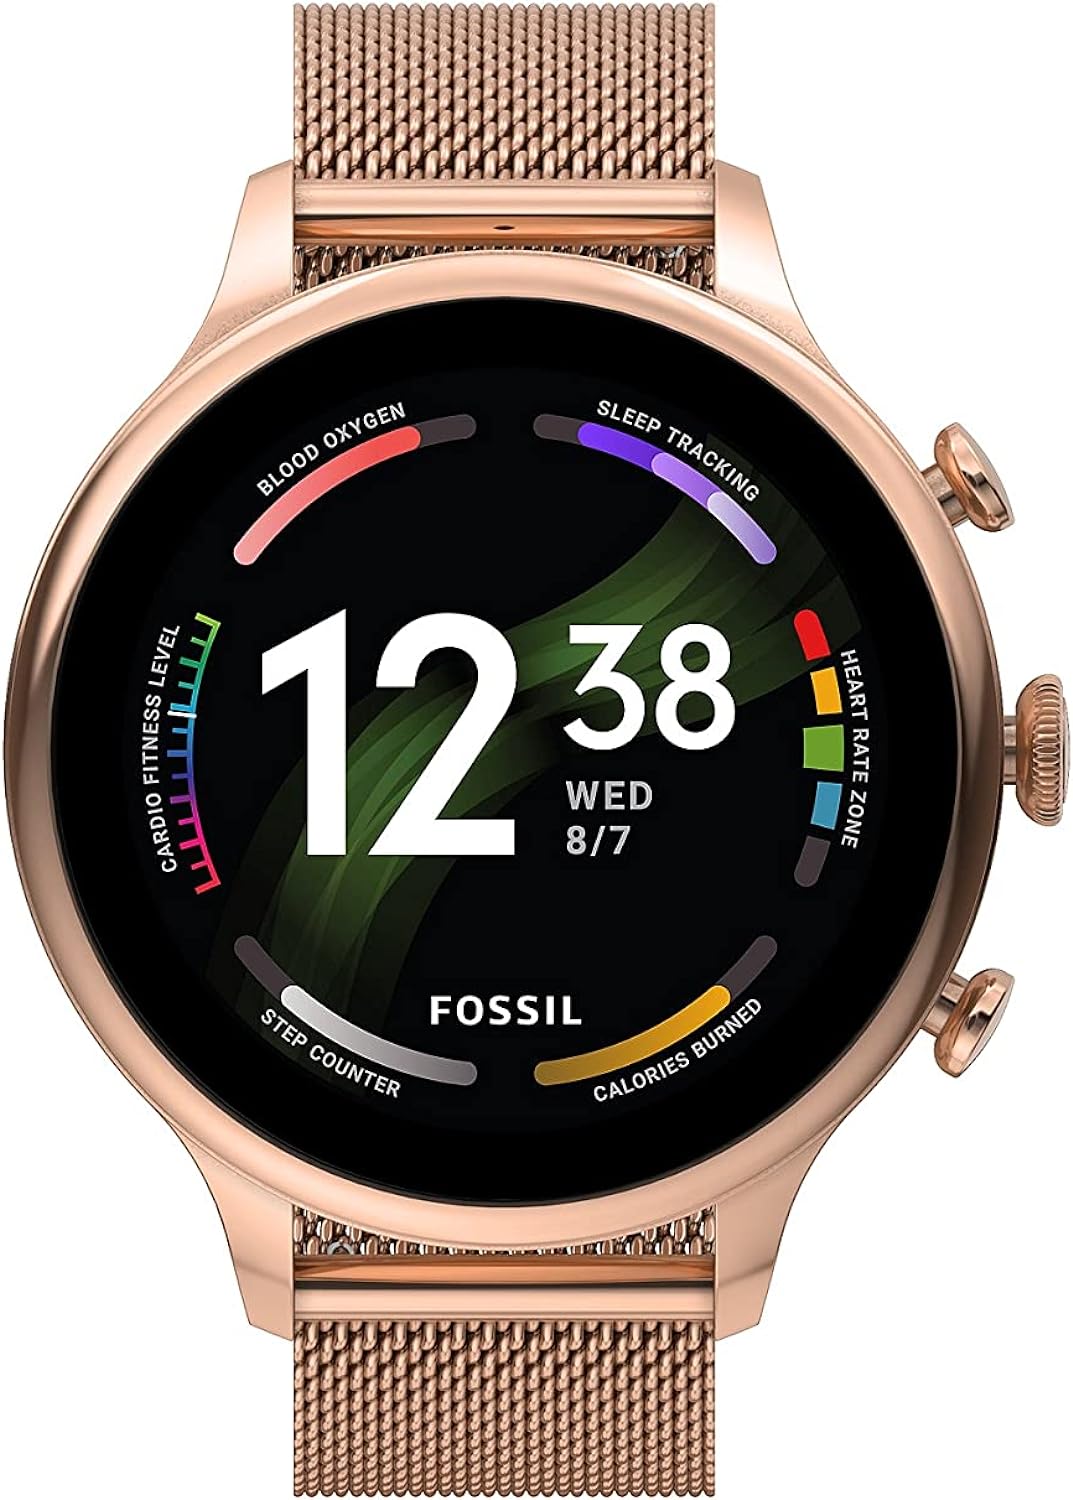 Fossil Watch for Women Gen 6 Touchscreen Smartwatch with Speaker, Heart Rate, NFC, and Smartphone Notifications FTW6082